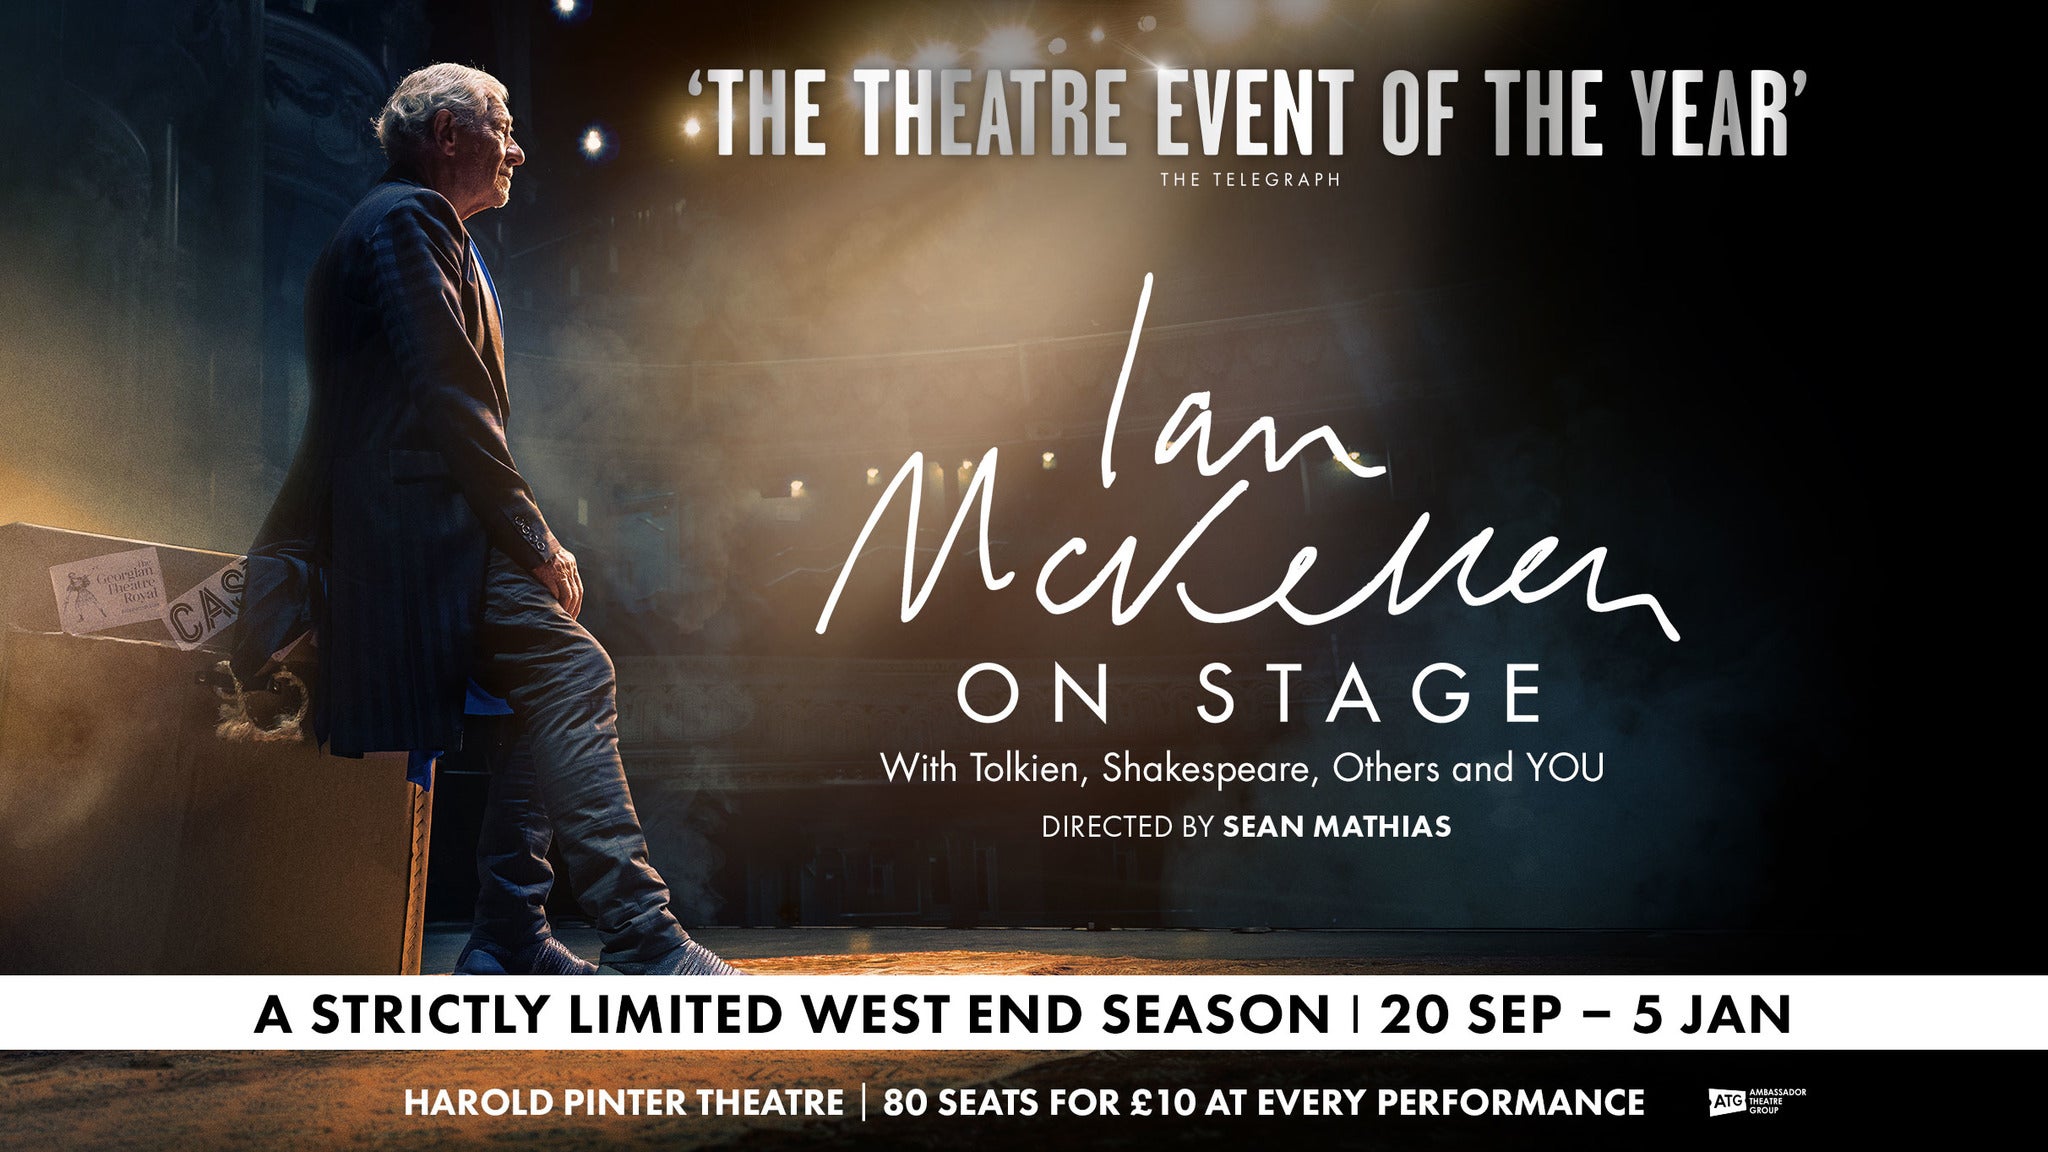 Ian McKellen On Stage: With Tolkien, Shakespeare, Others and You! Event Title Pic